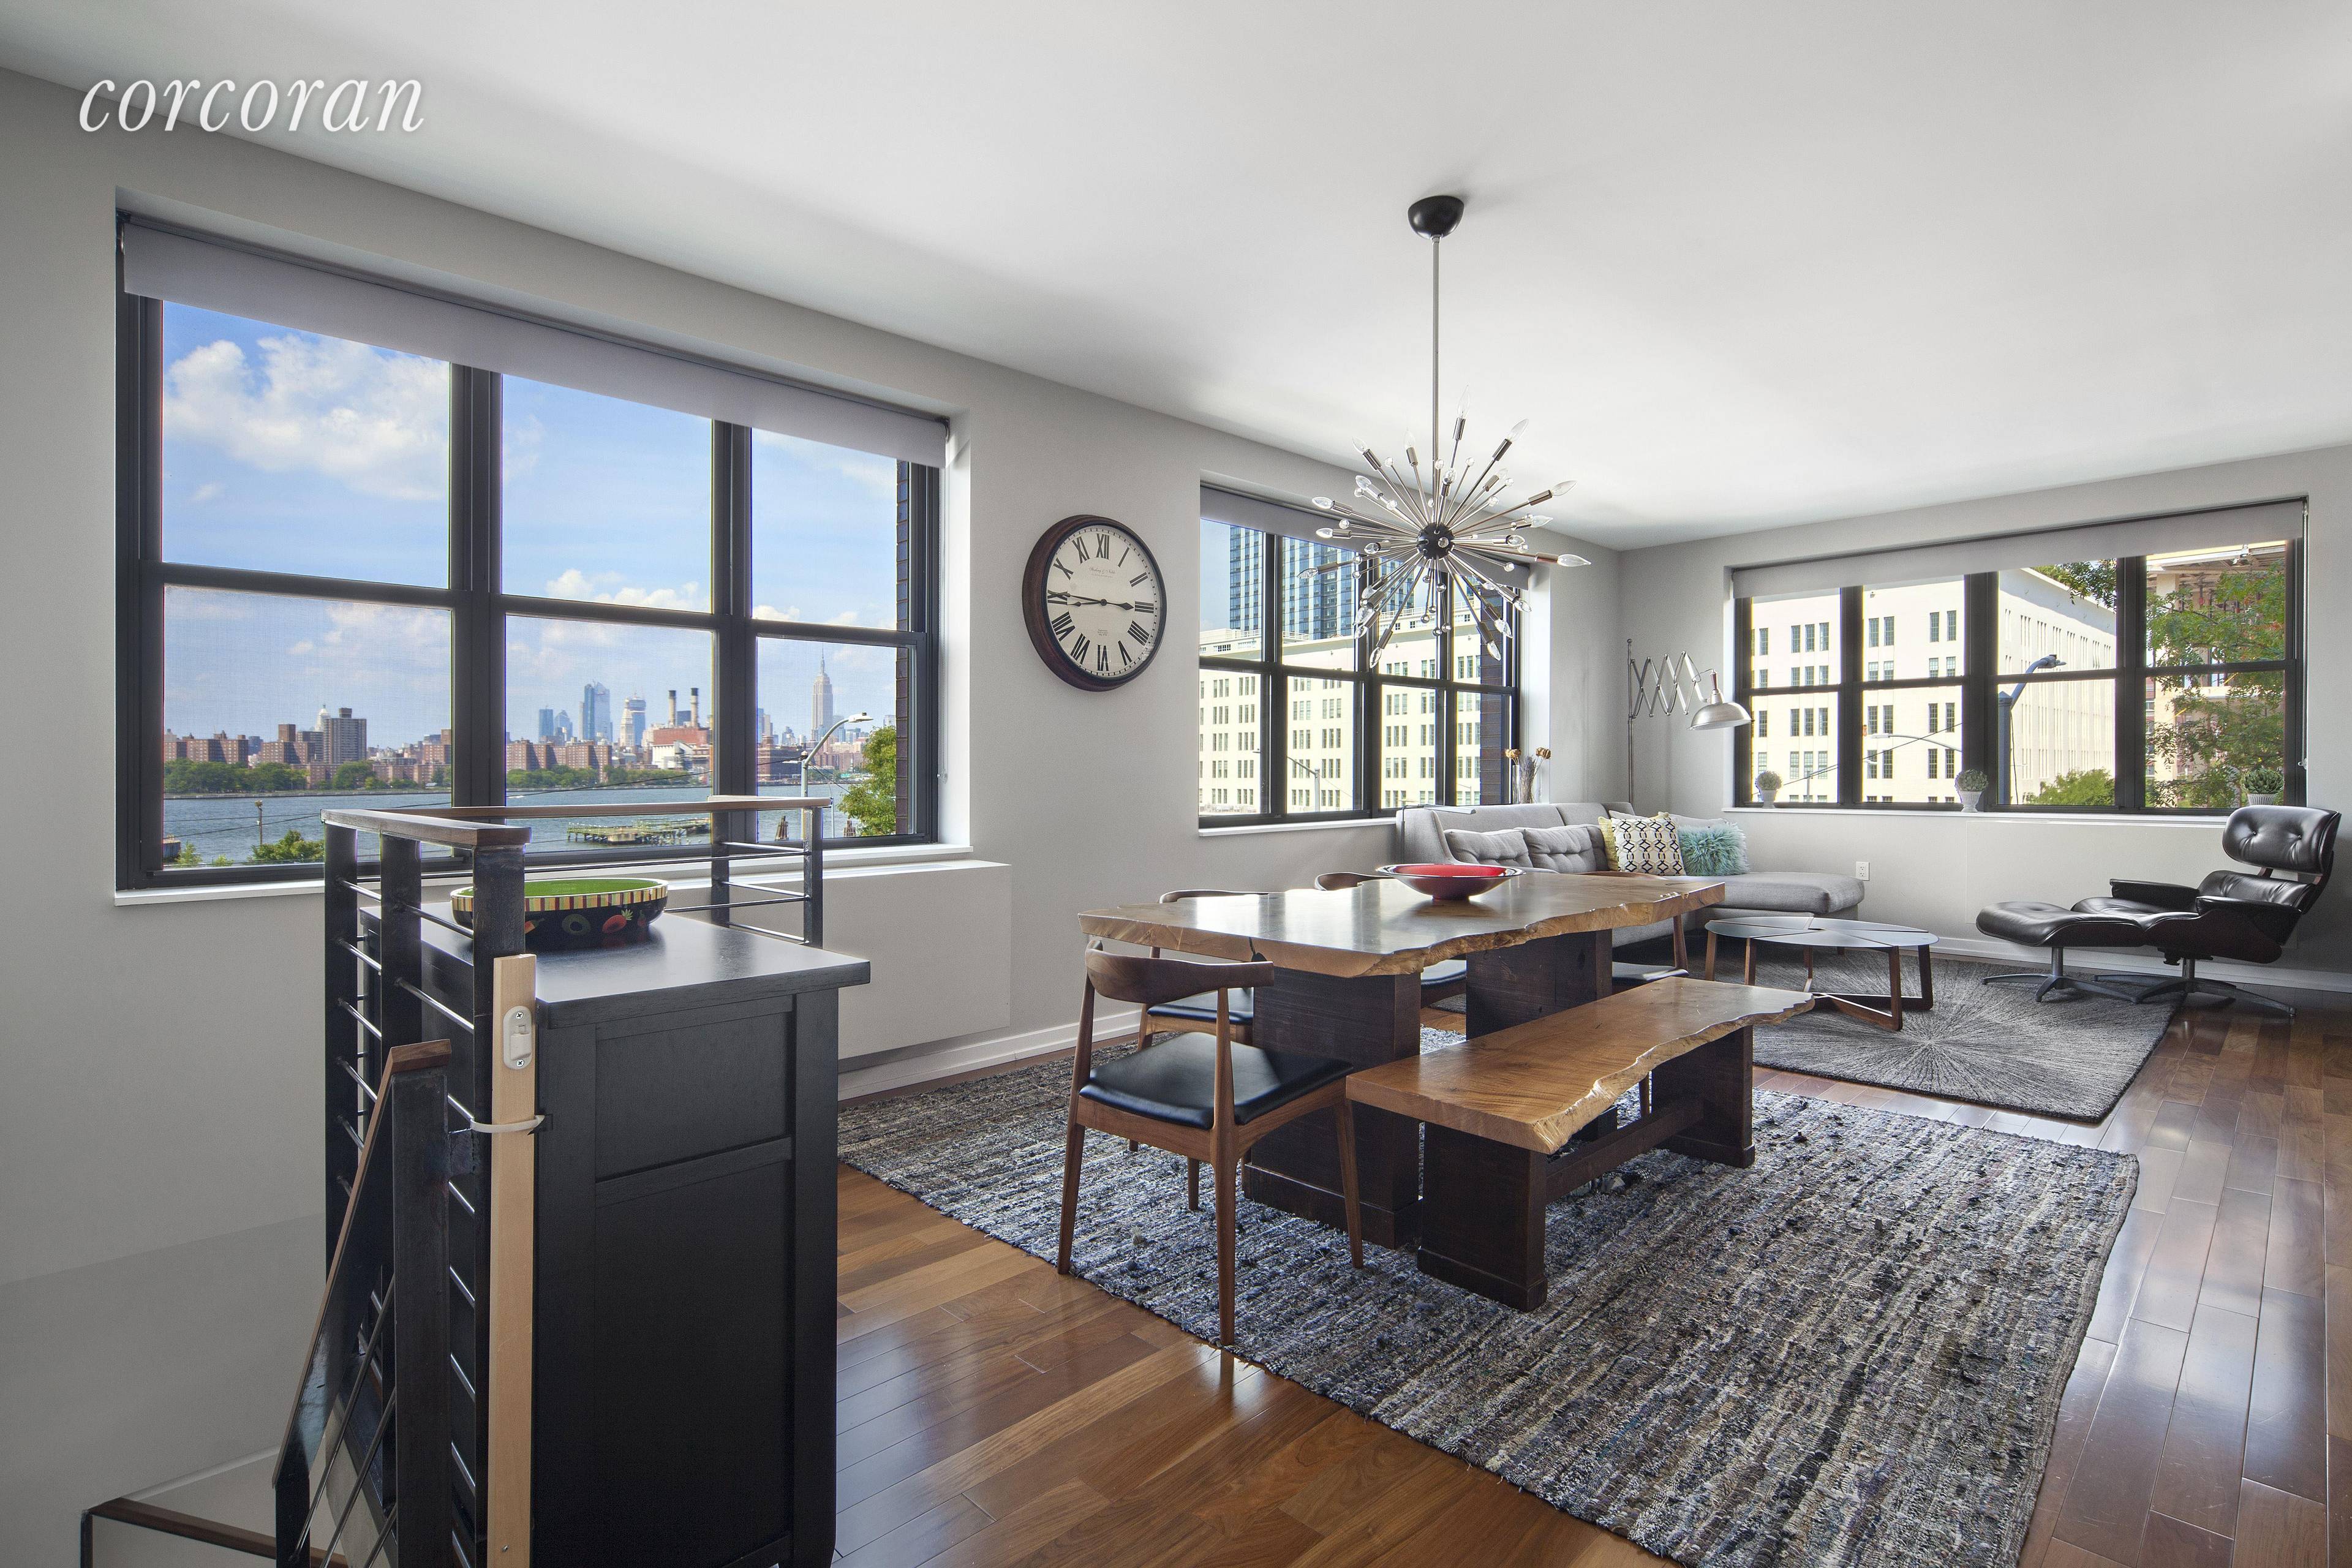 Enjoy townhouse like living with condo amenities in this sprawling four bedroom, four bathroom duplex in a modern Williamsburg building offering uninterrupted transportation options just blocks away.